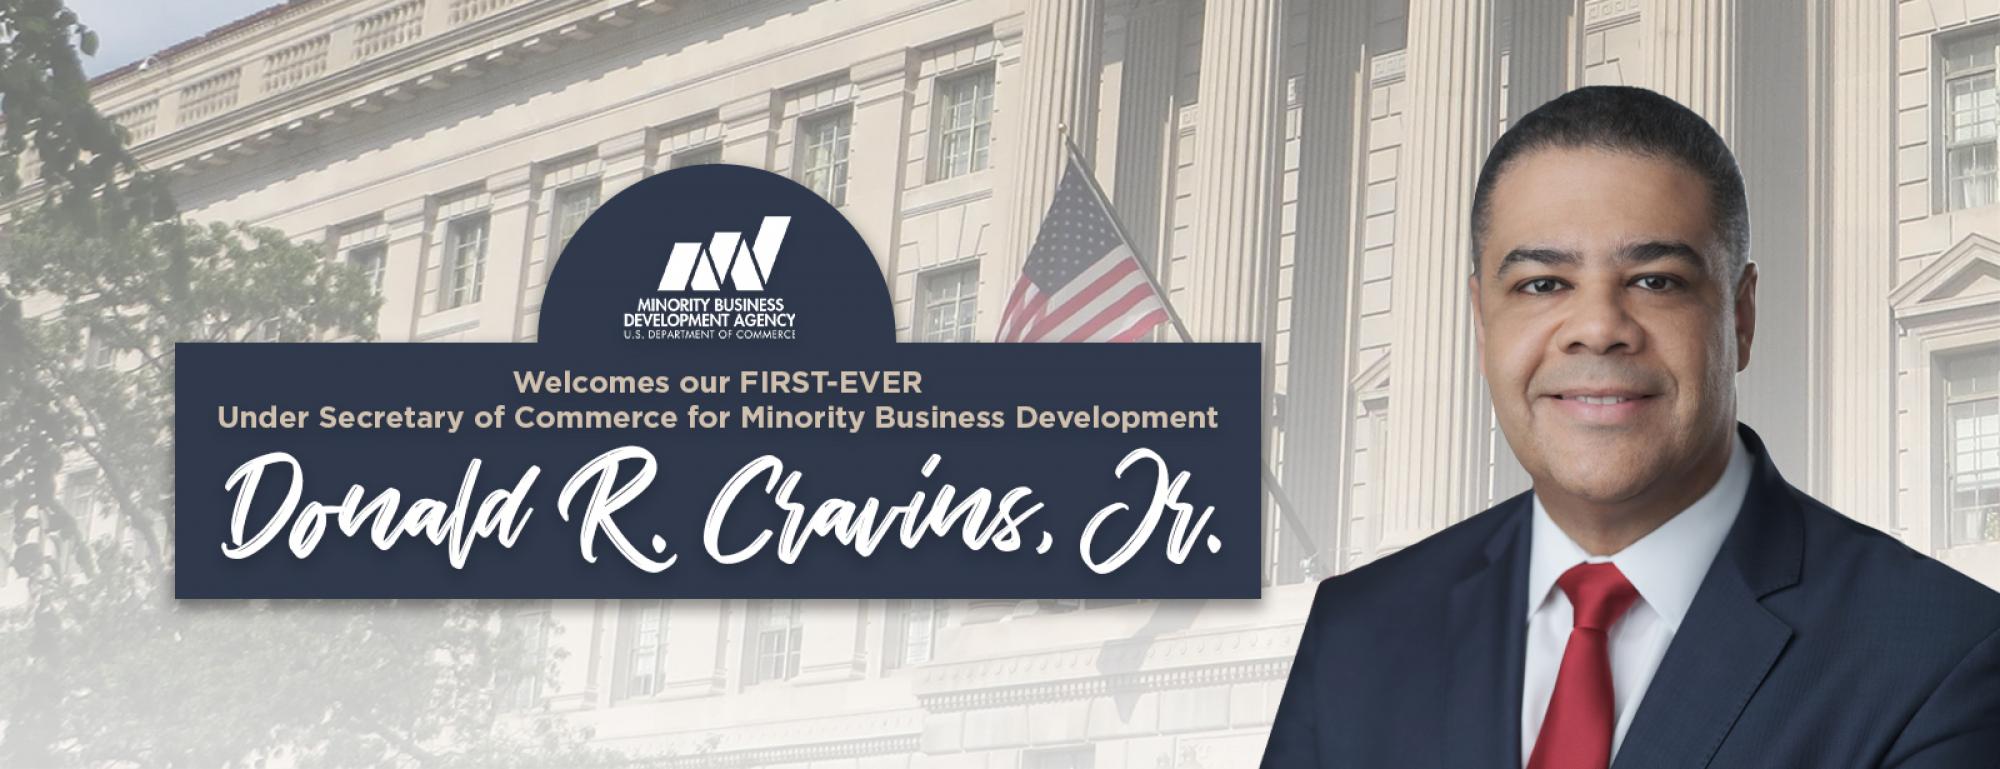 MBDA Welcomes our first Under Secretary of Commerce Donald R. Cravis Jr.